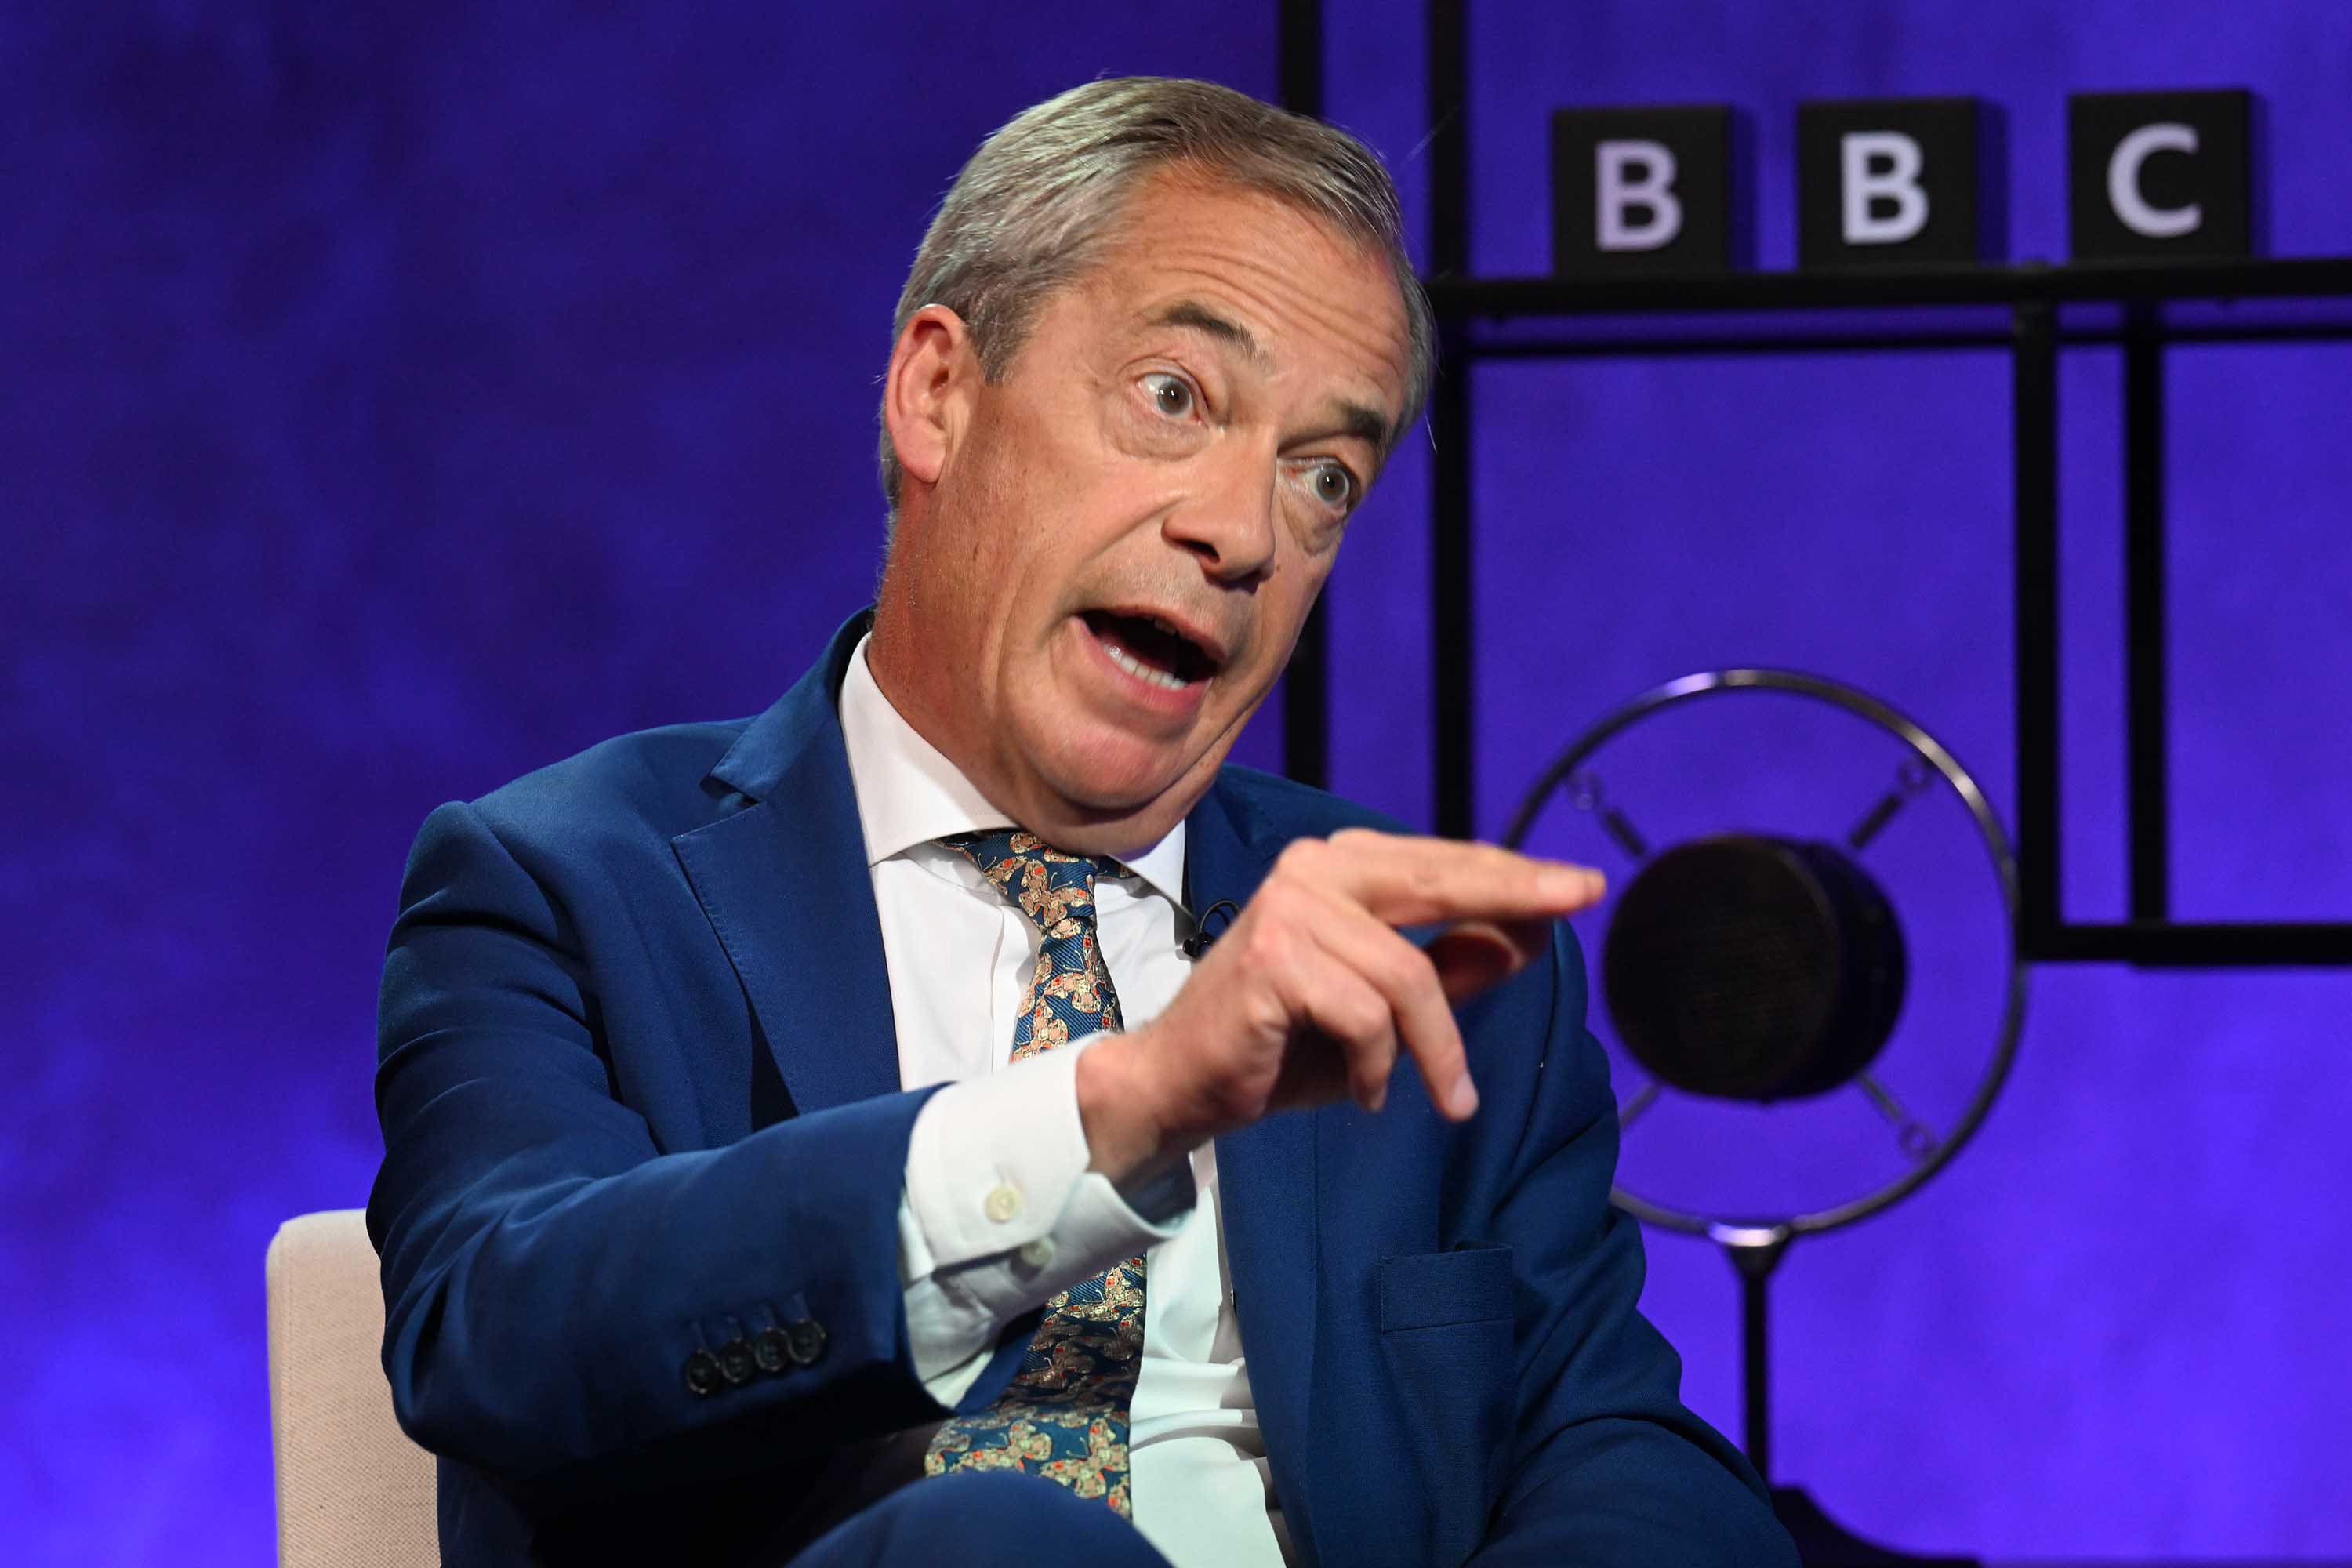 Nigel Farage drew a link between Nato and European Union expansion in recent decades and the conflict in eastern Europe